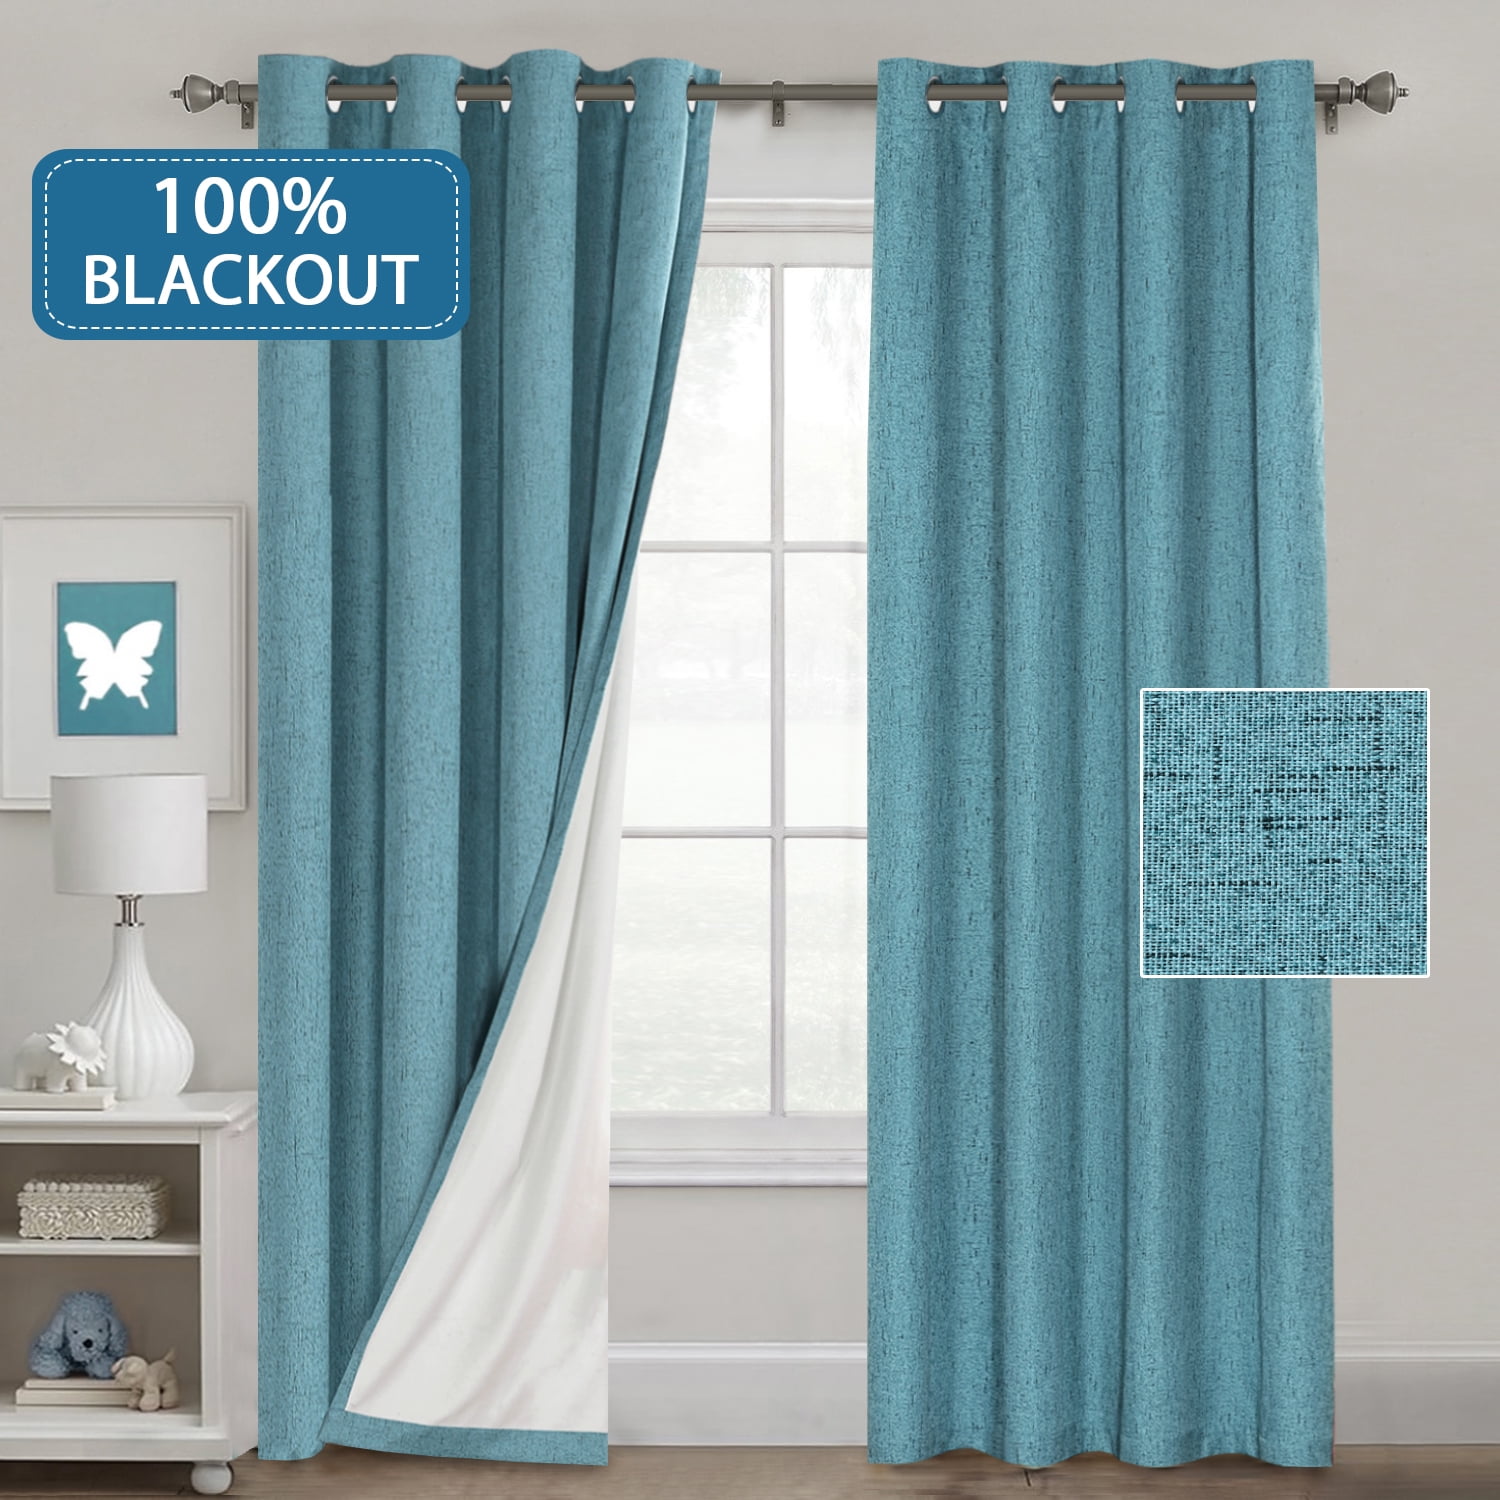 Waterproof 100 Blackout Curtains For Bedroom Linen Look Lined Curtains For Living Room Anti Rust Grommet Window Curtains 2 Panels 52 By 96 Inch